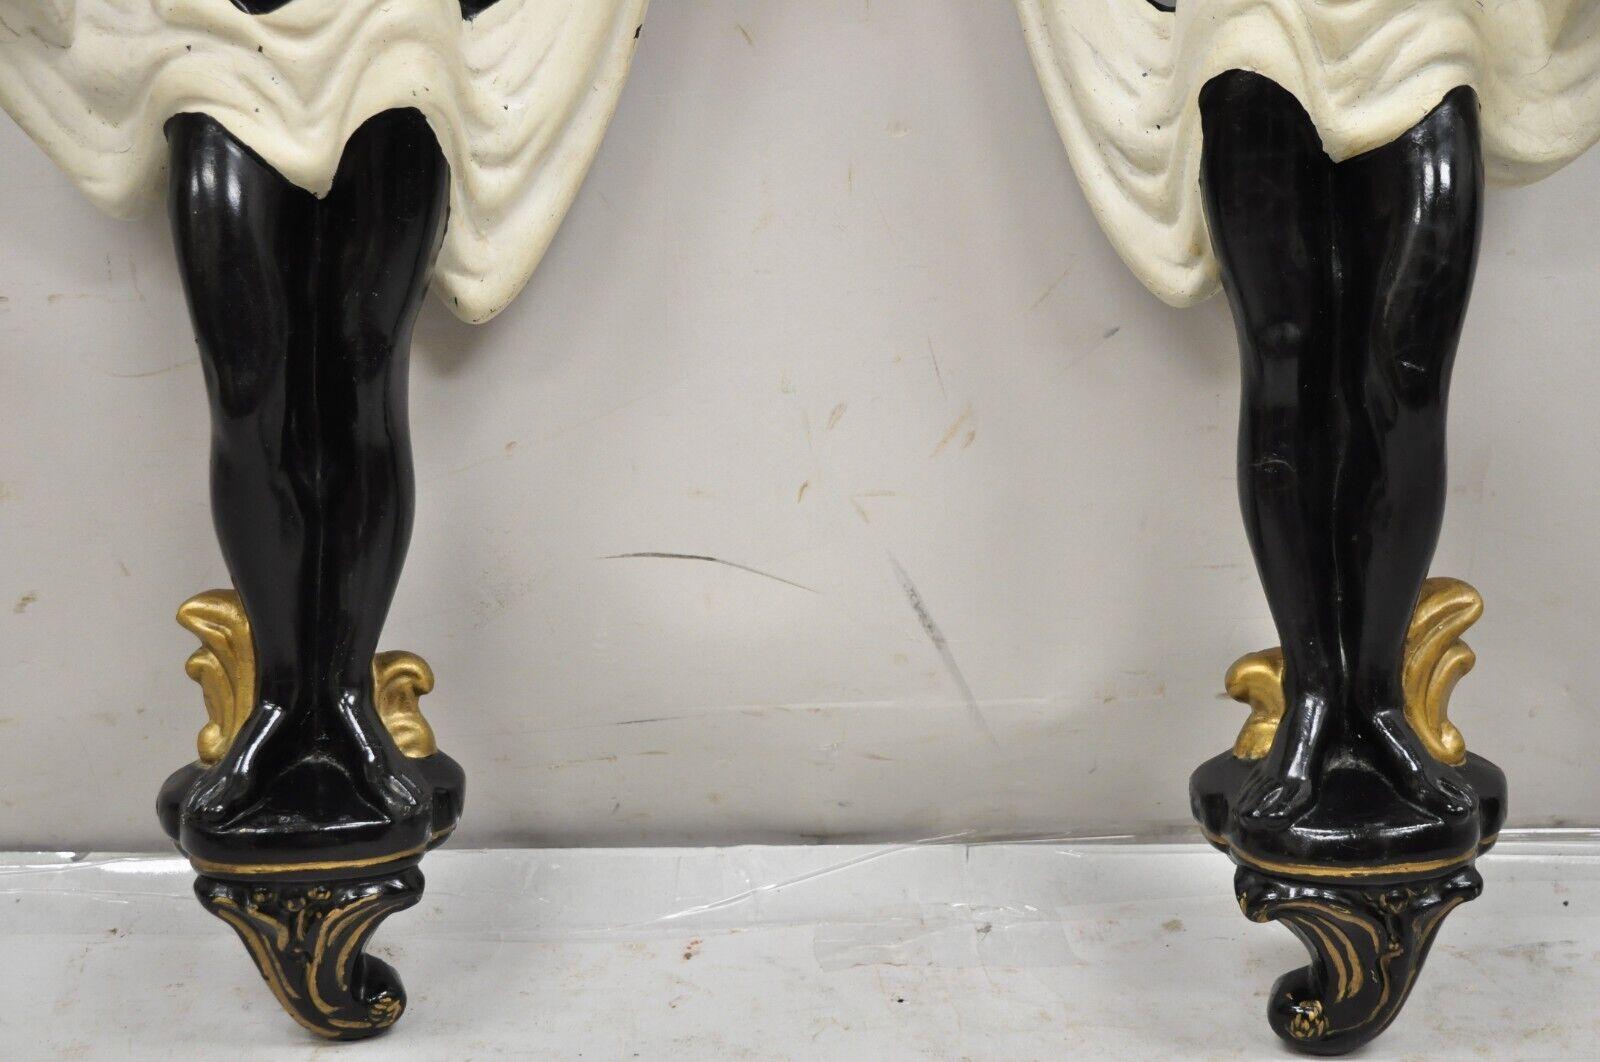 20th Century Vintage Arabian Chalkware Male Figural Wall Sconce Candlesticks - a Pair For Sale